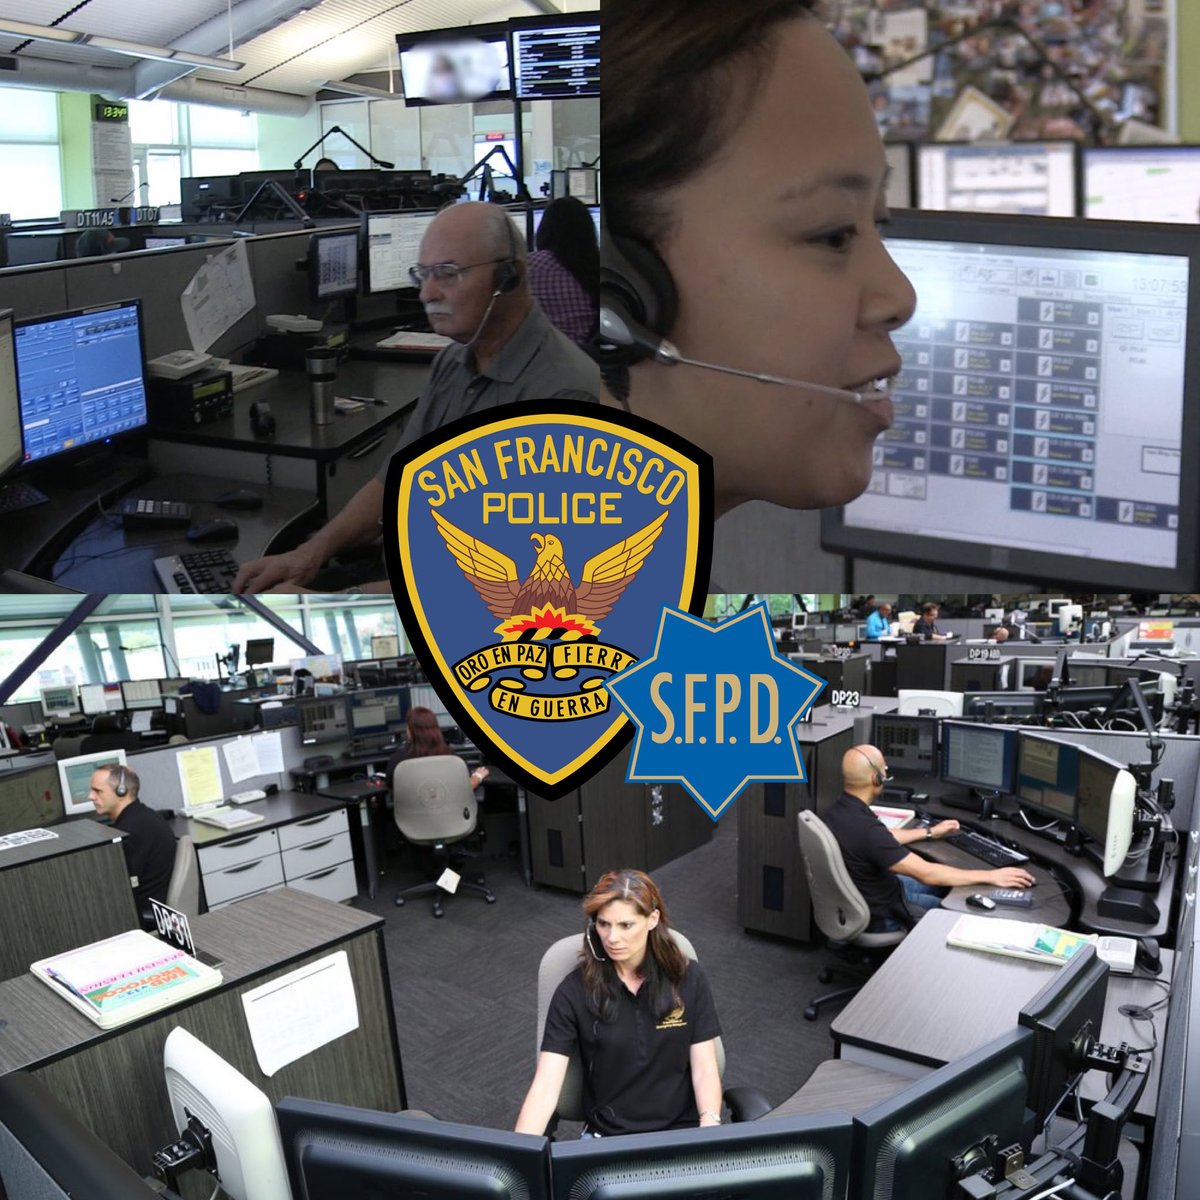 We are proud to recognize our public safety dispatchers and celebrate #NationalPublicSafetyTelecommunicatorsWeek! You are often the unsung heroes of our city, providing reassurance to those calling in search of help. Thank you for your service to San Francisco.